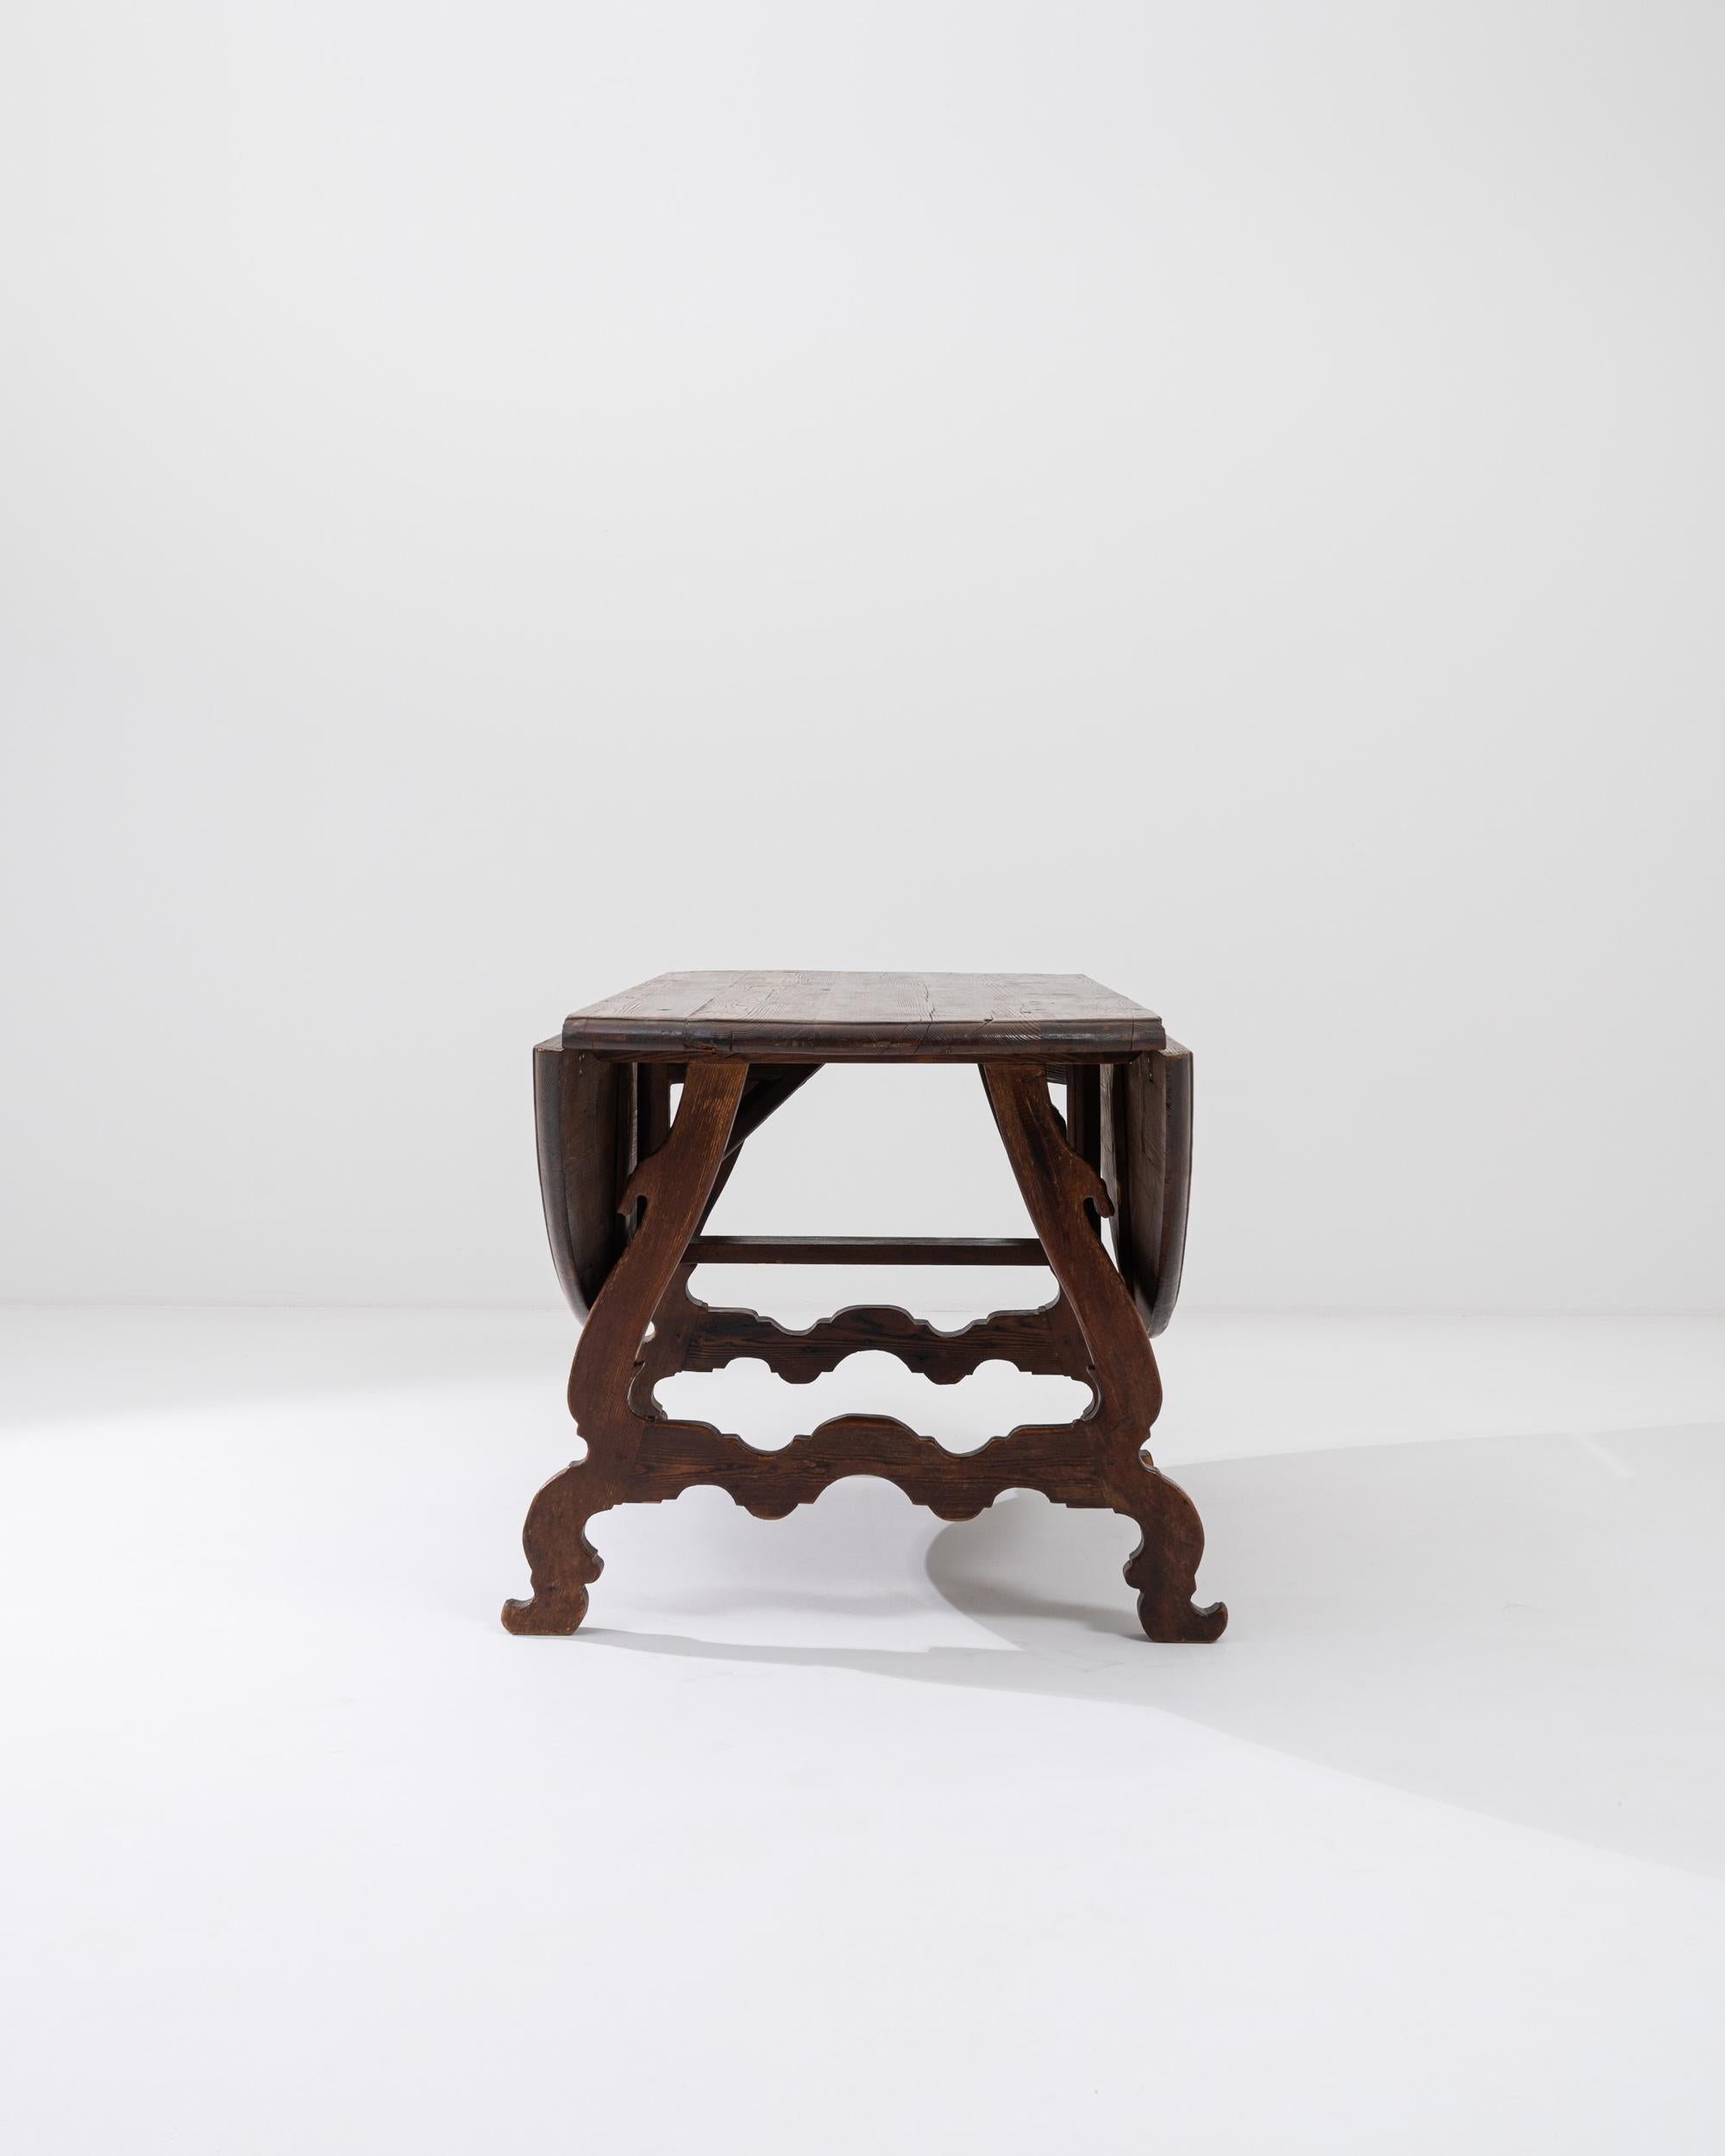 A wooden table from 1900s France. This charming and unique table features two extendable leaves on each side which swing upwards to complete its circular top. Undergirding the tabletop rests a pleasing geometry of curved and twisting wooden